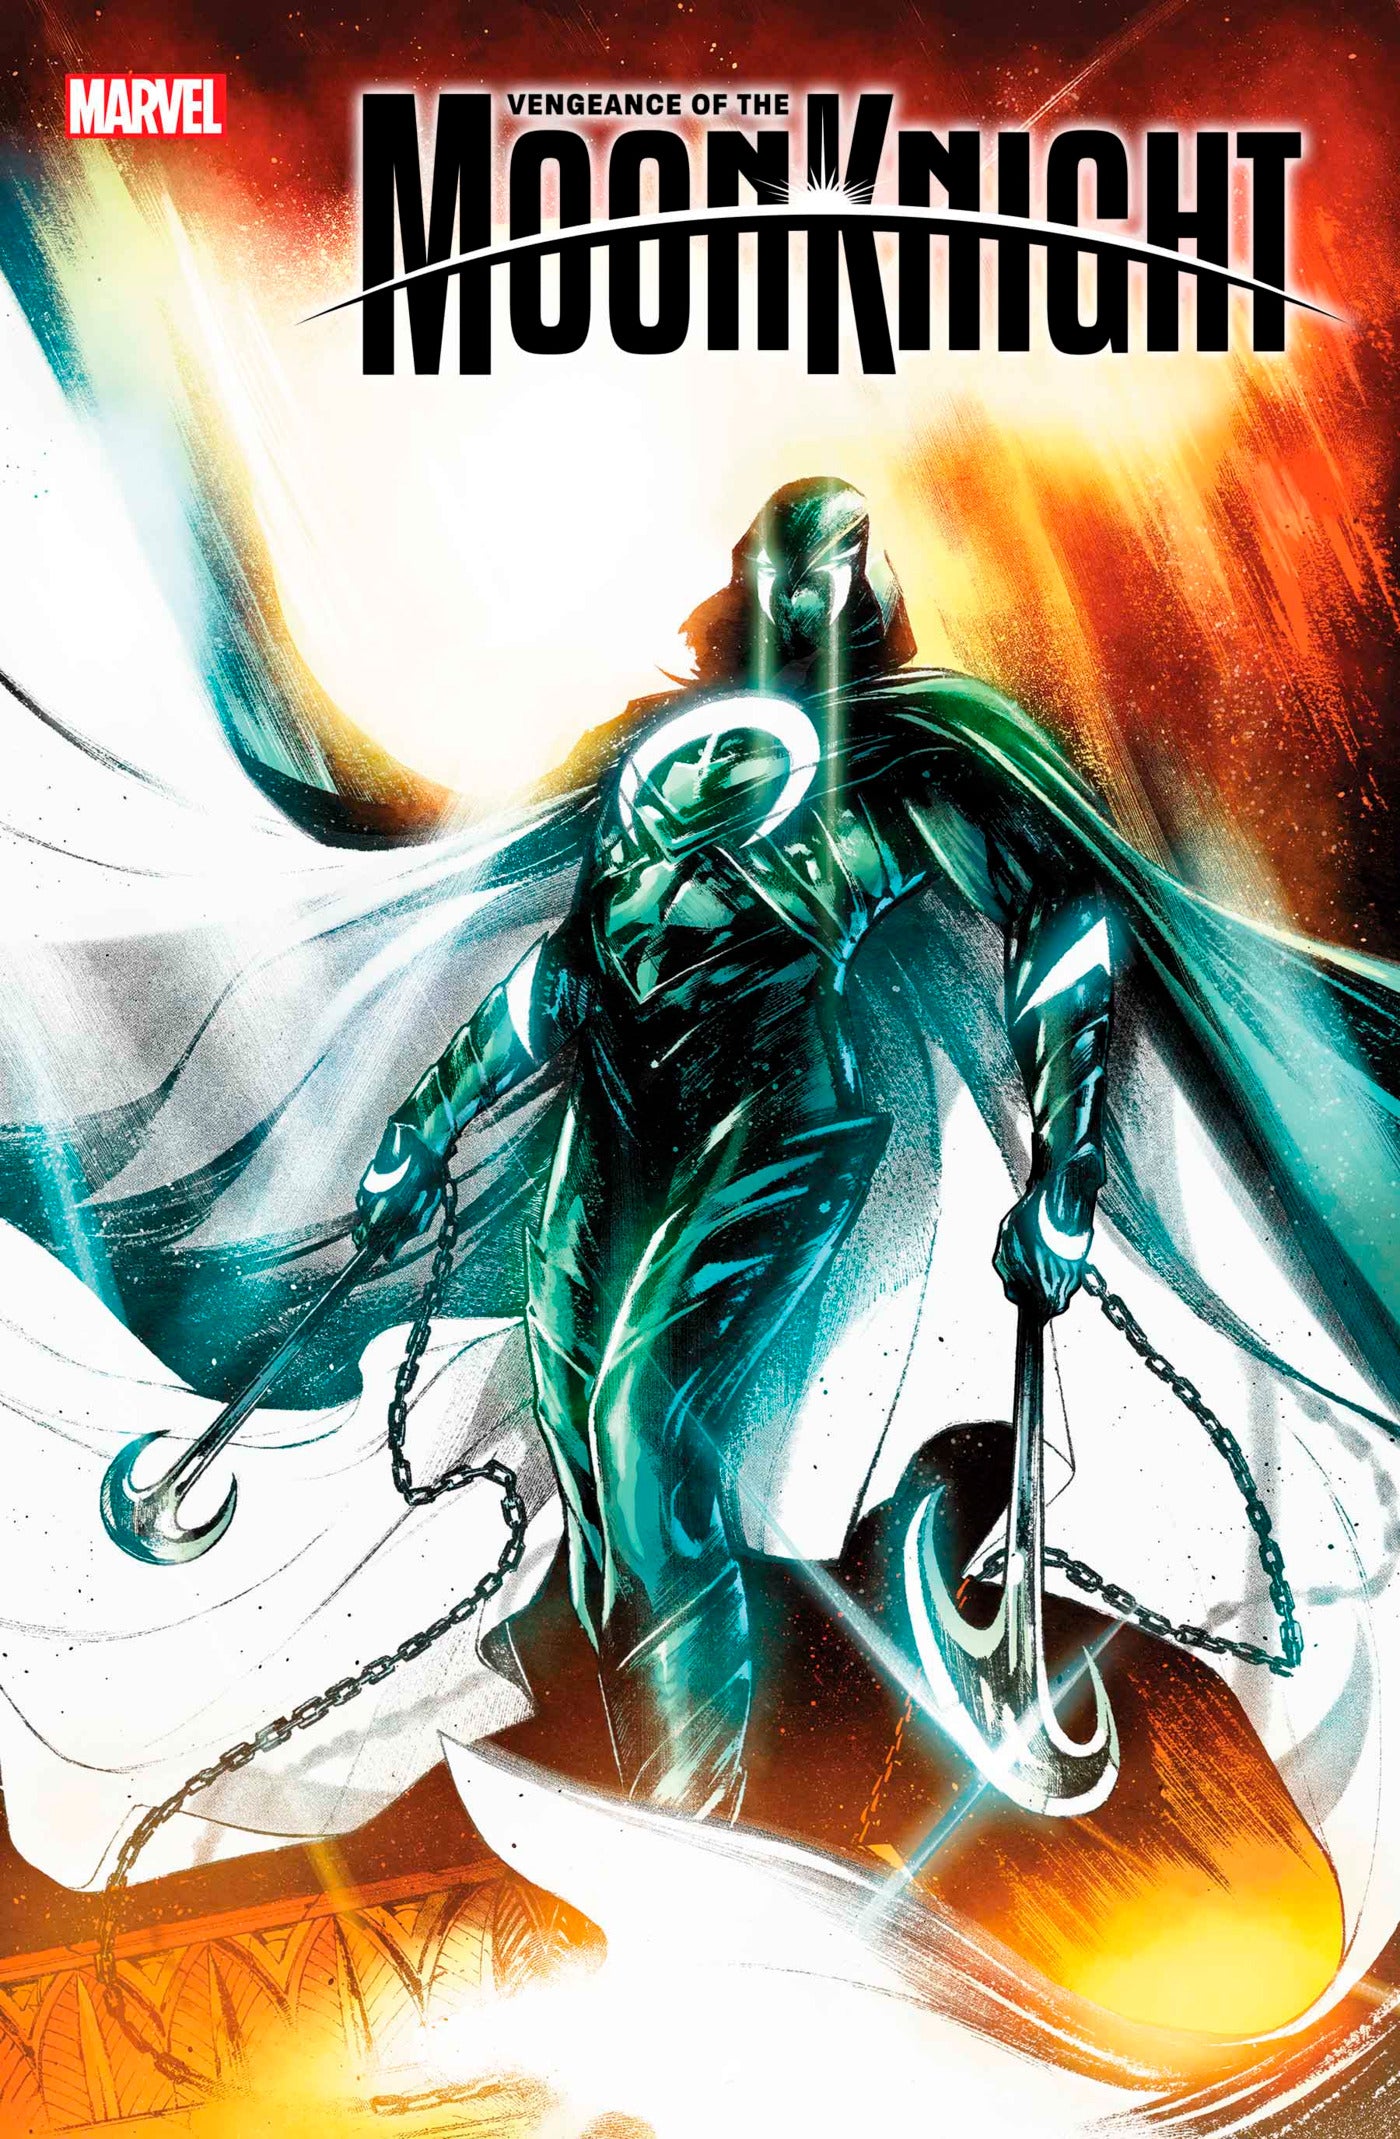 VENGEANCE OF THE MOON KNIGHT #1 receives a trailer - GoCollect